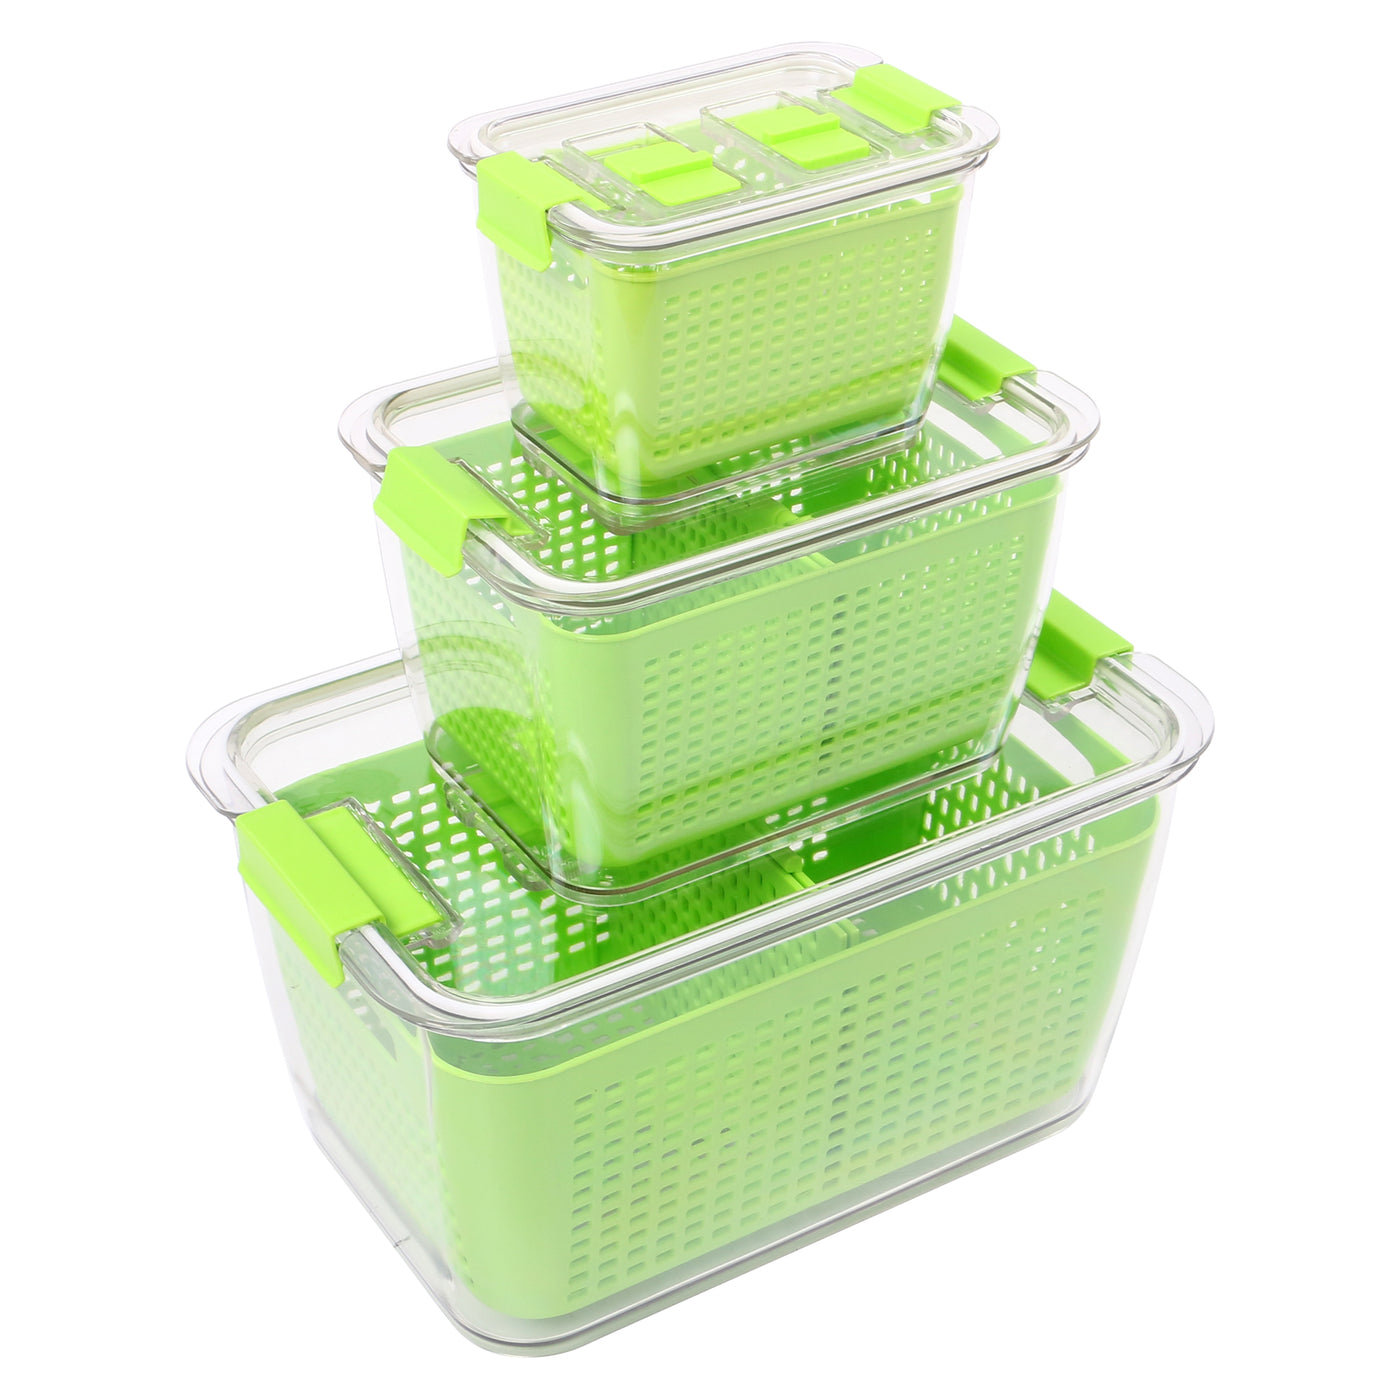 3PCS Refrigerator Produce Saver Storage Container Fresh Keeper with Air Vent